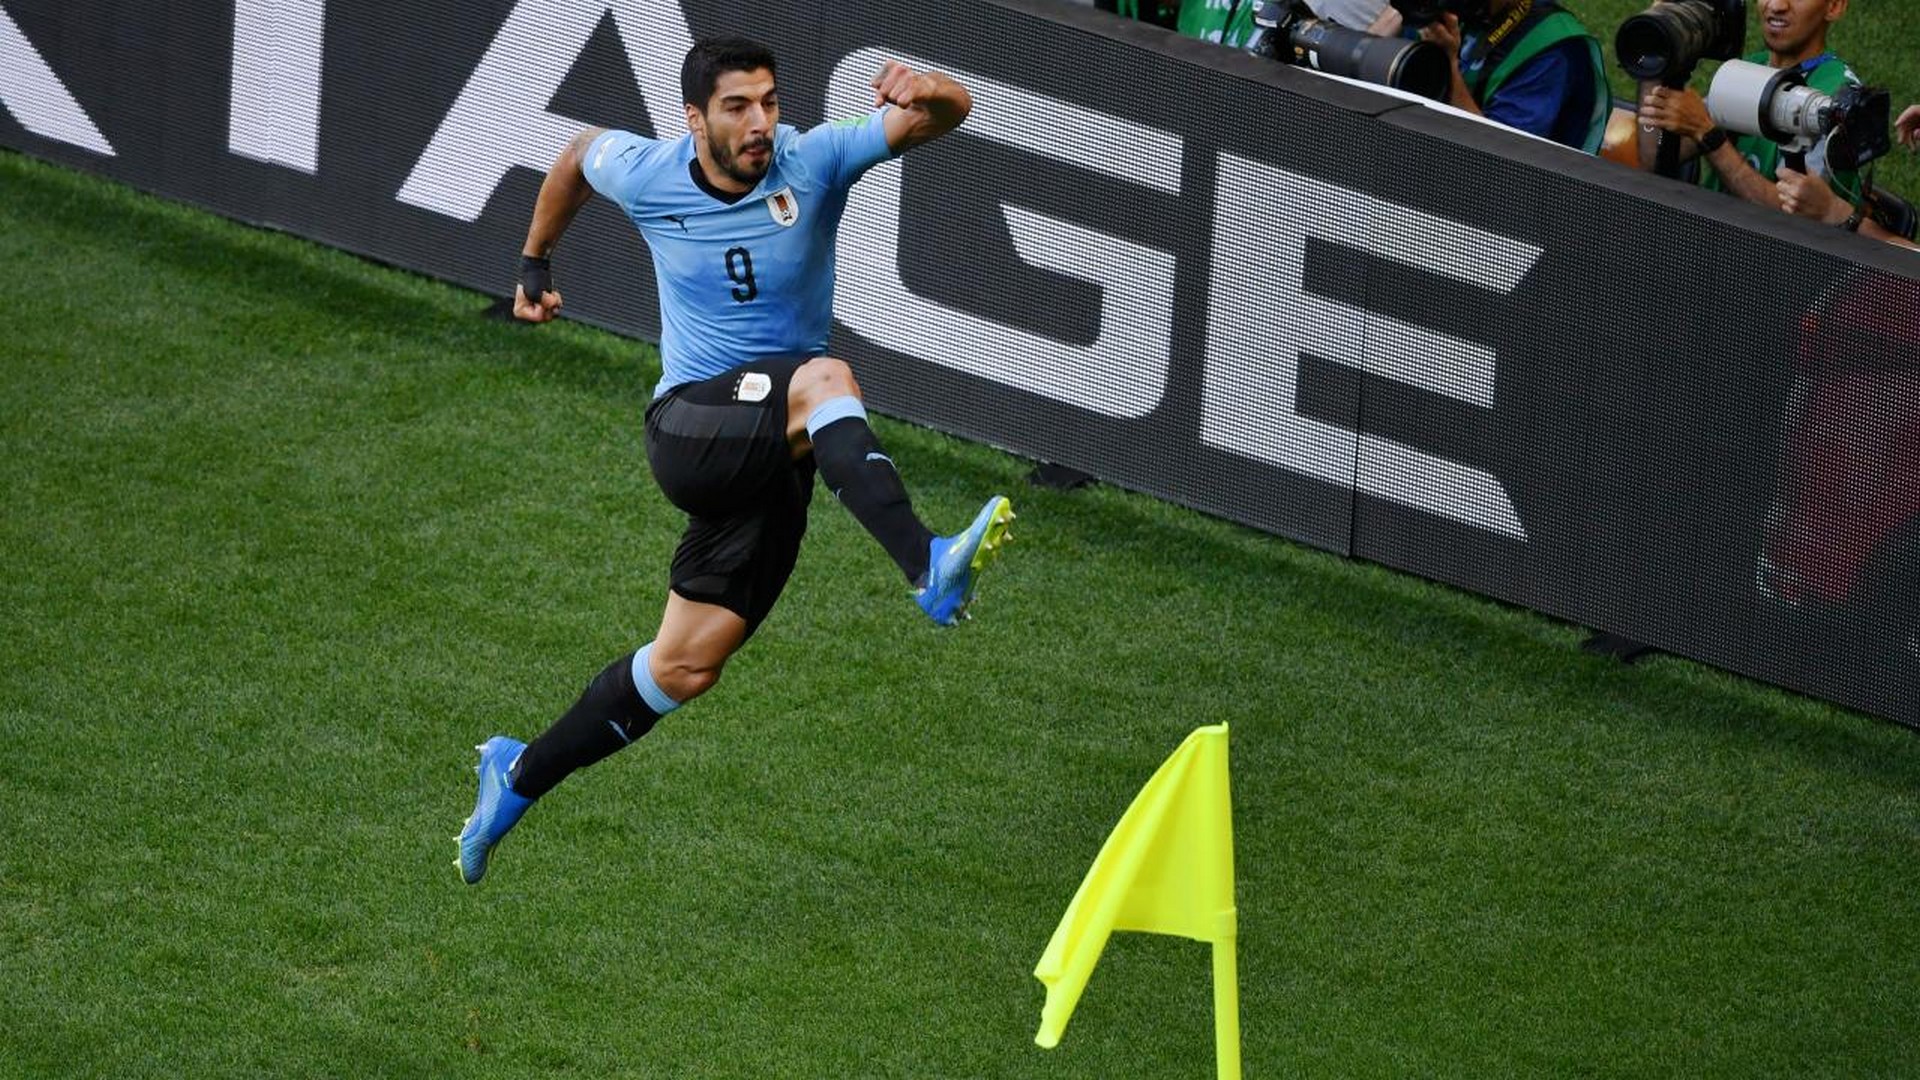 Luis Suarez Uruguay Wallpaper HD With Resolution 1920X1080 pixel. You can make this wallpaper for your Desktop Computer Backgrounds, Mac Wallpapers, Android Lock screen or iPhone Screensavers